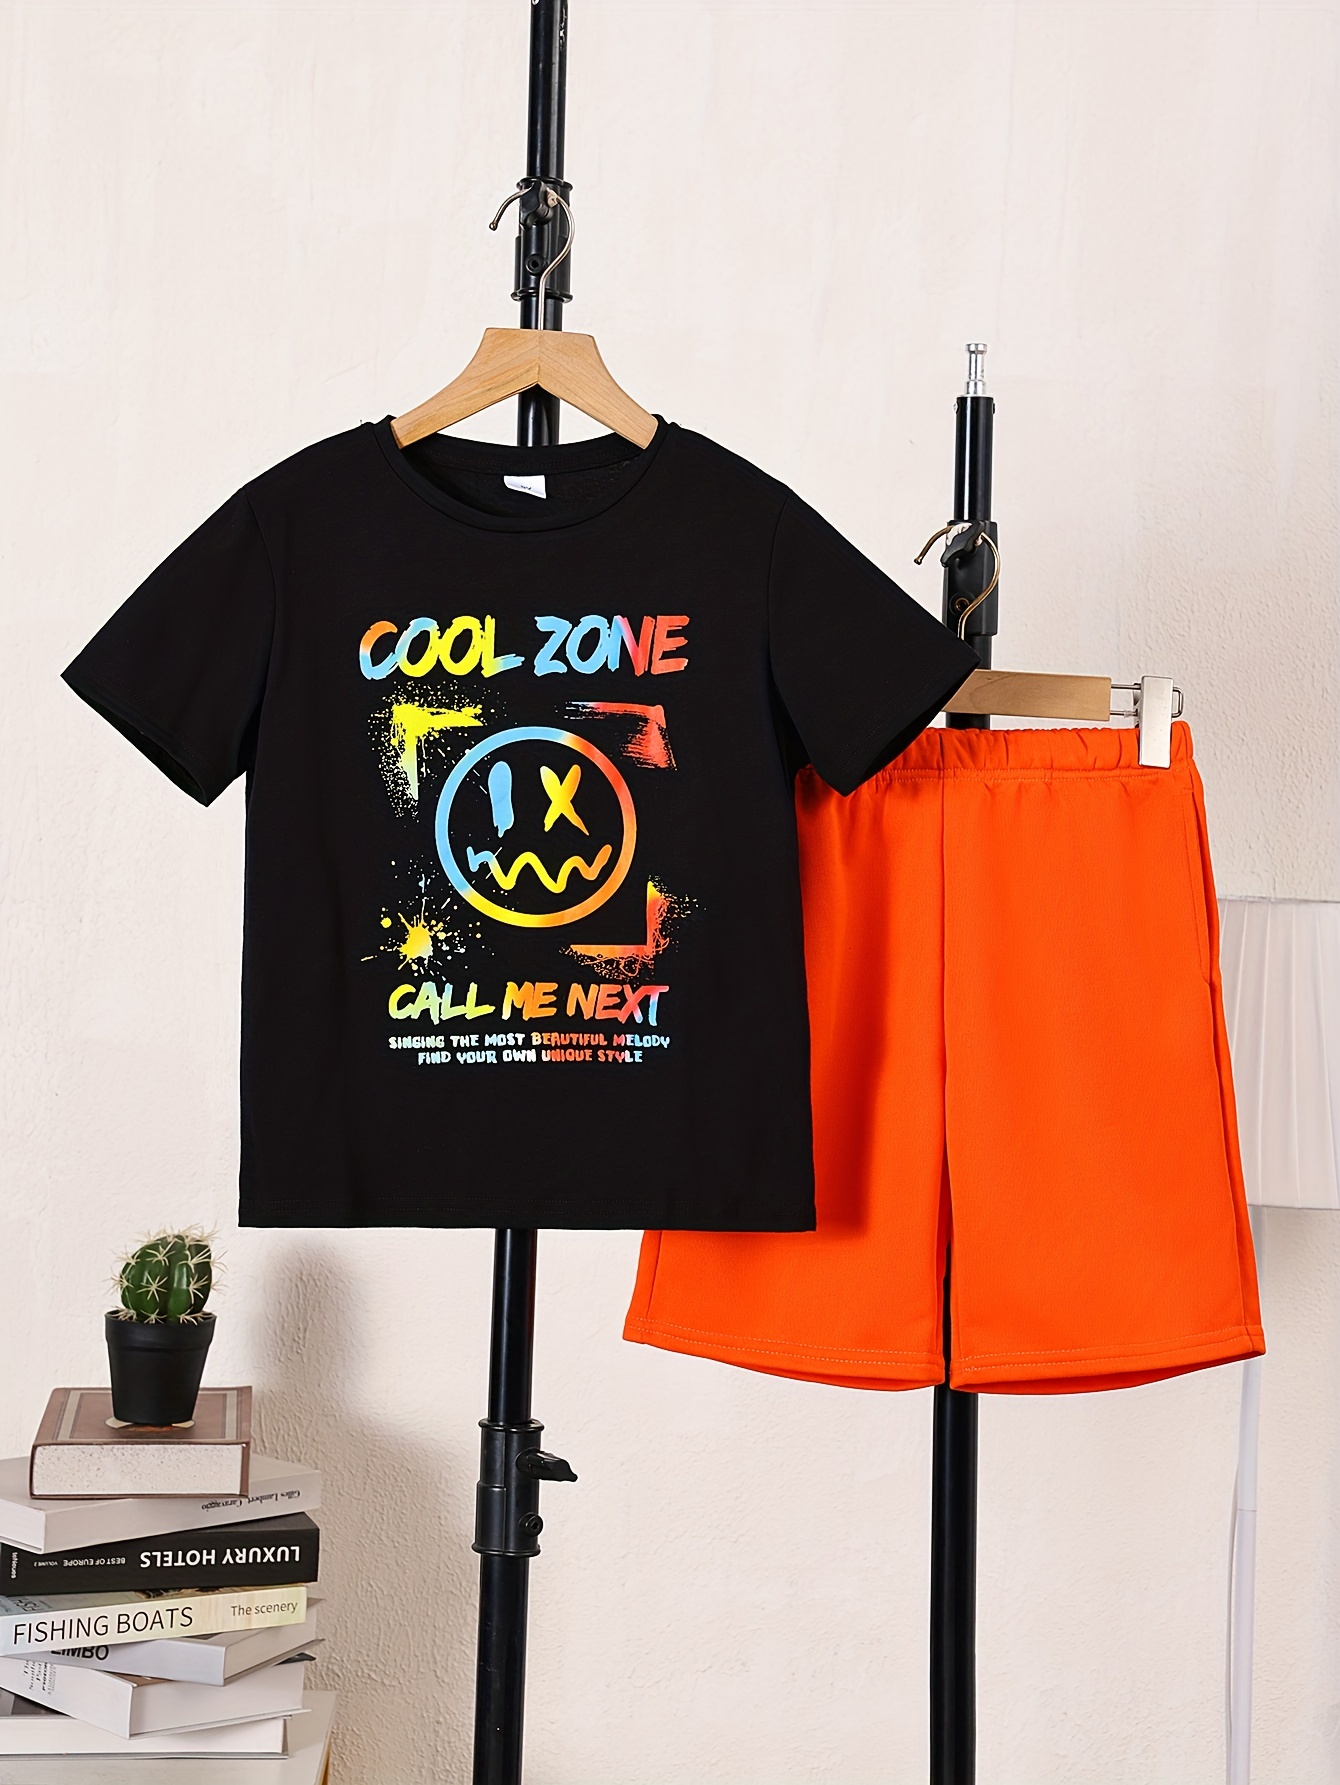 Boy's Stylish 2pcs, T-Shirt & Shorts Set, Cool Zone Cartoon Pattern Print Short Sleeve Top, Casual Outfits, Kids Clothes For Summer